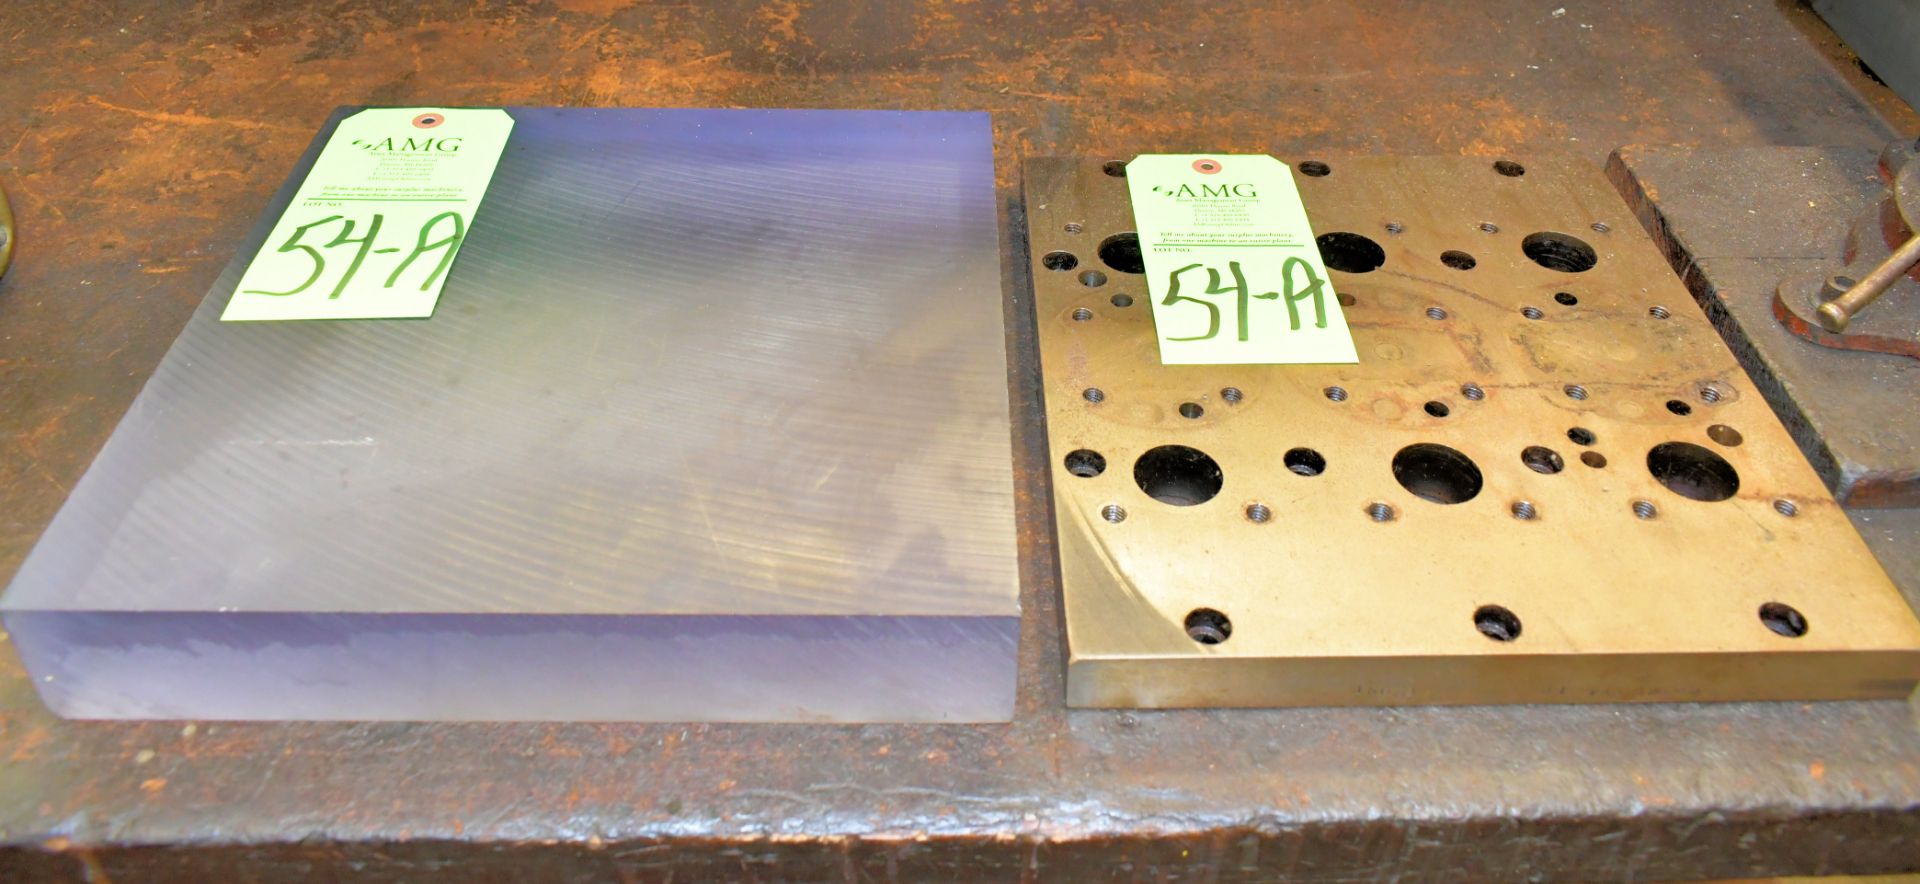 Lot-(1) 12" x 12" x 2" Acrylic Block and (1) 11" x 12" x 1" Steel Die Plate